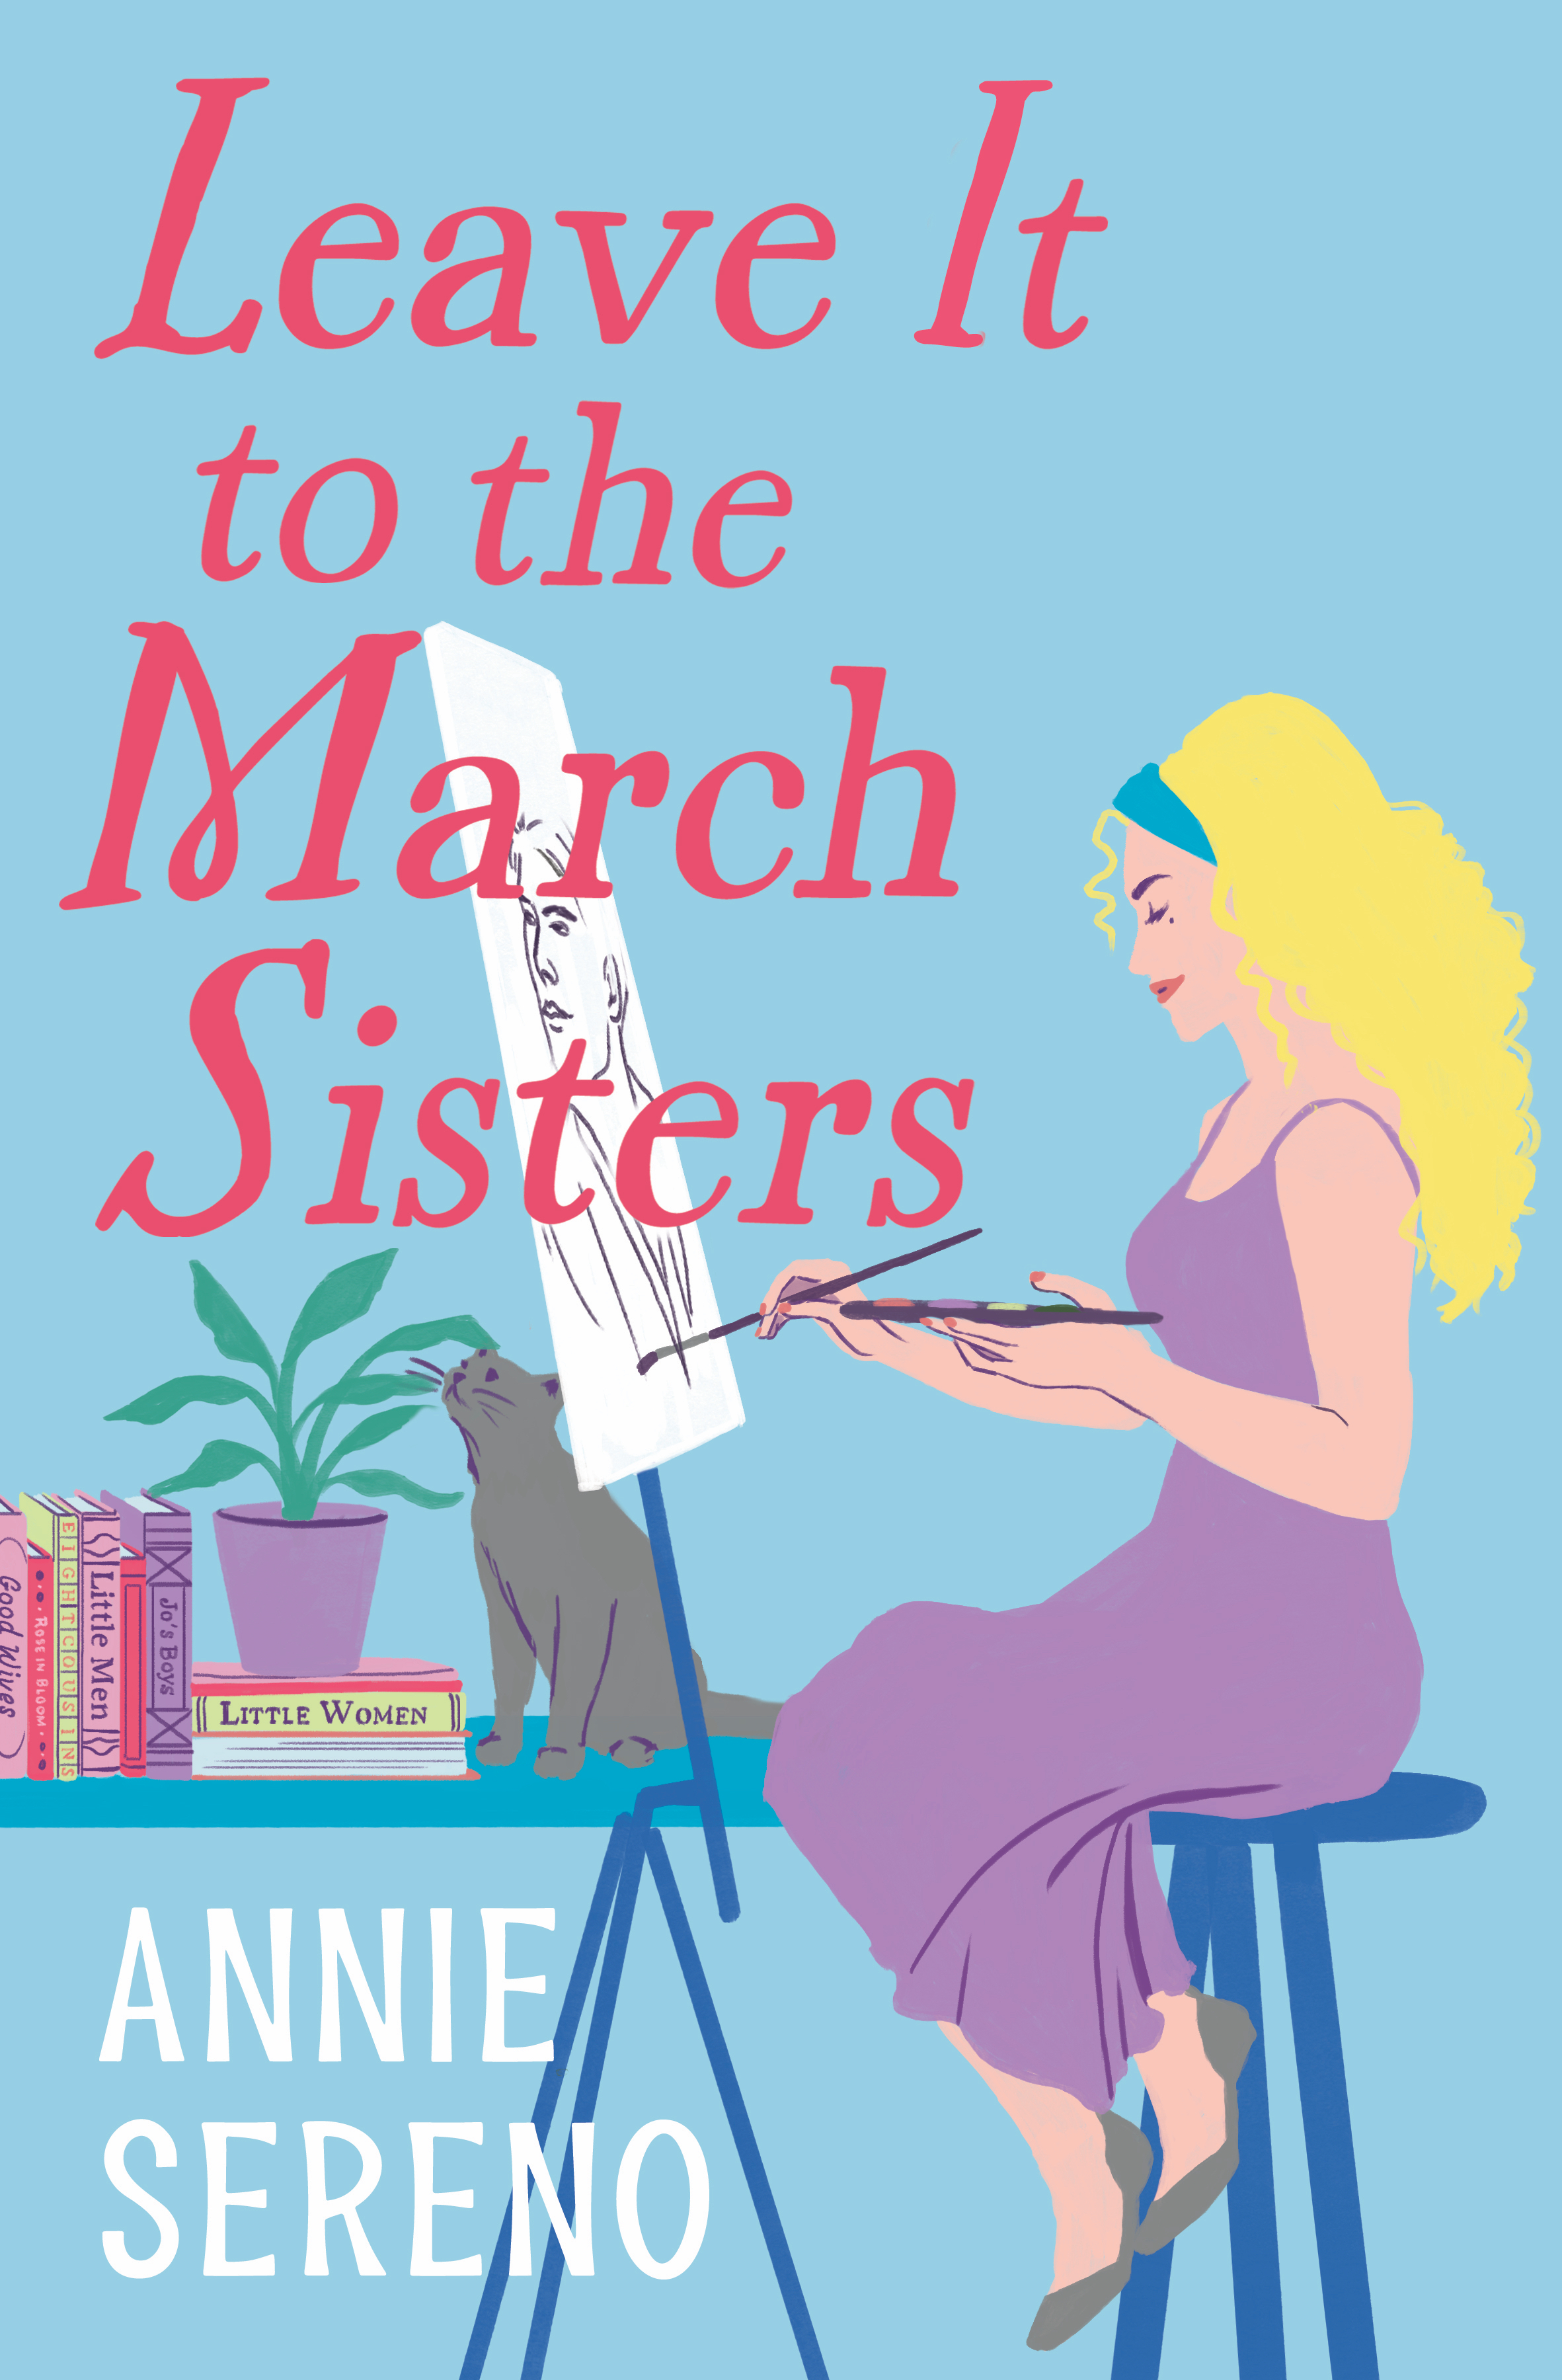 Mfm Sex College Drunk Party - Leave It to the March Sisters by Annie Sereno | Hachette Book Group